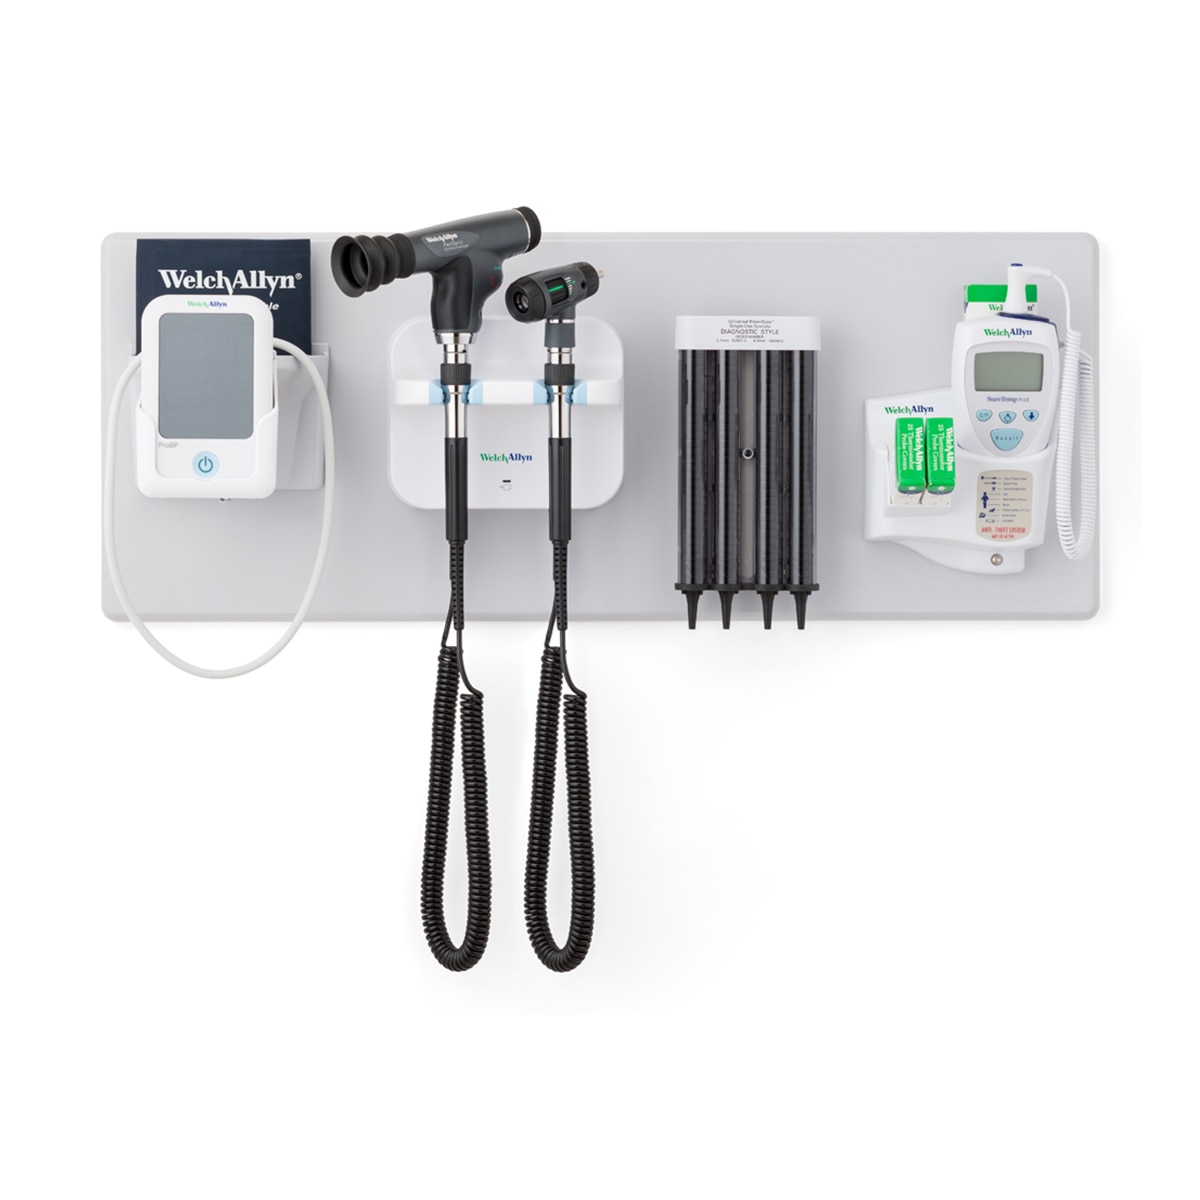 777 Integrated Wall System with ProBP 2000 device, otoscope, PanOptic ophthalmoscope, probe covers and SureTemp thermometer